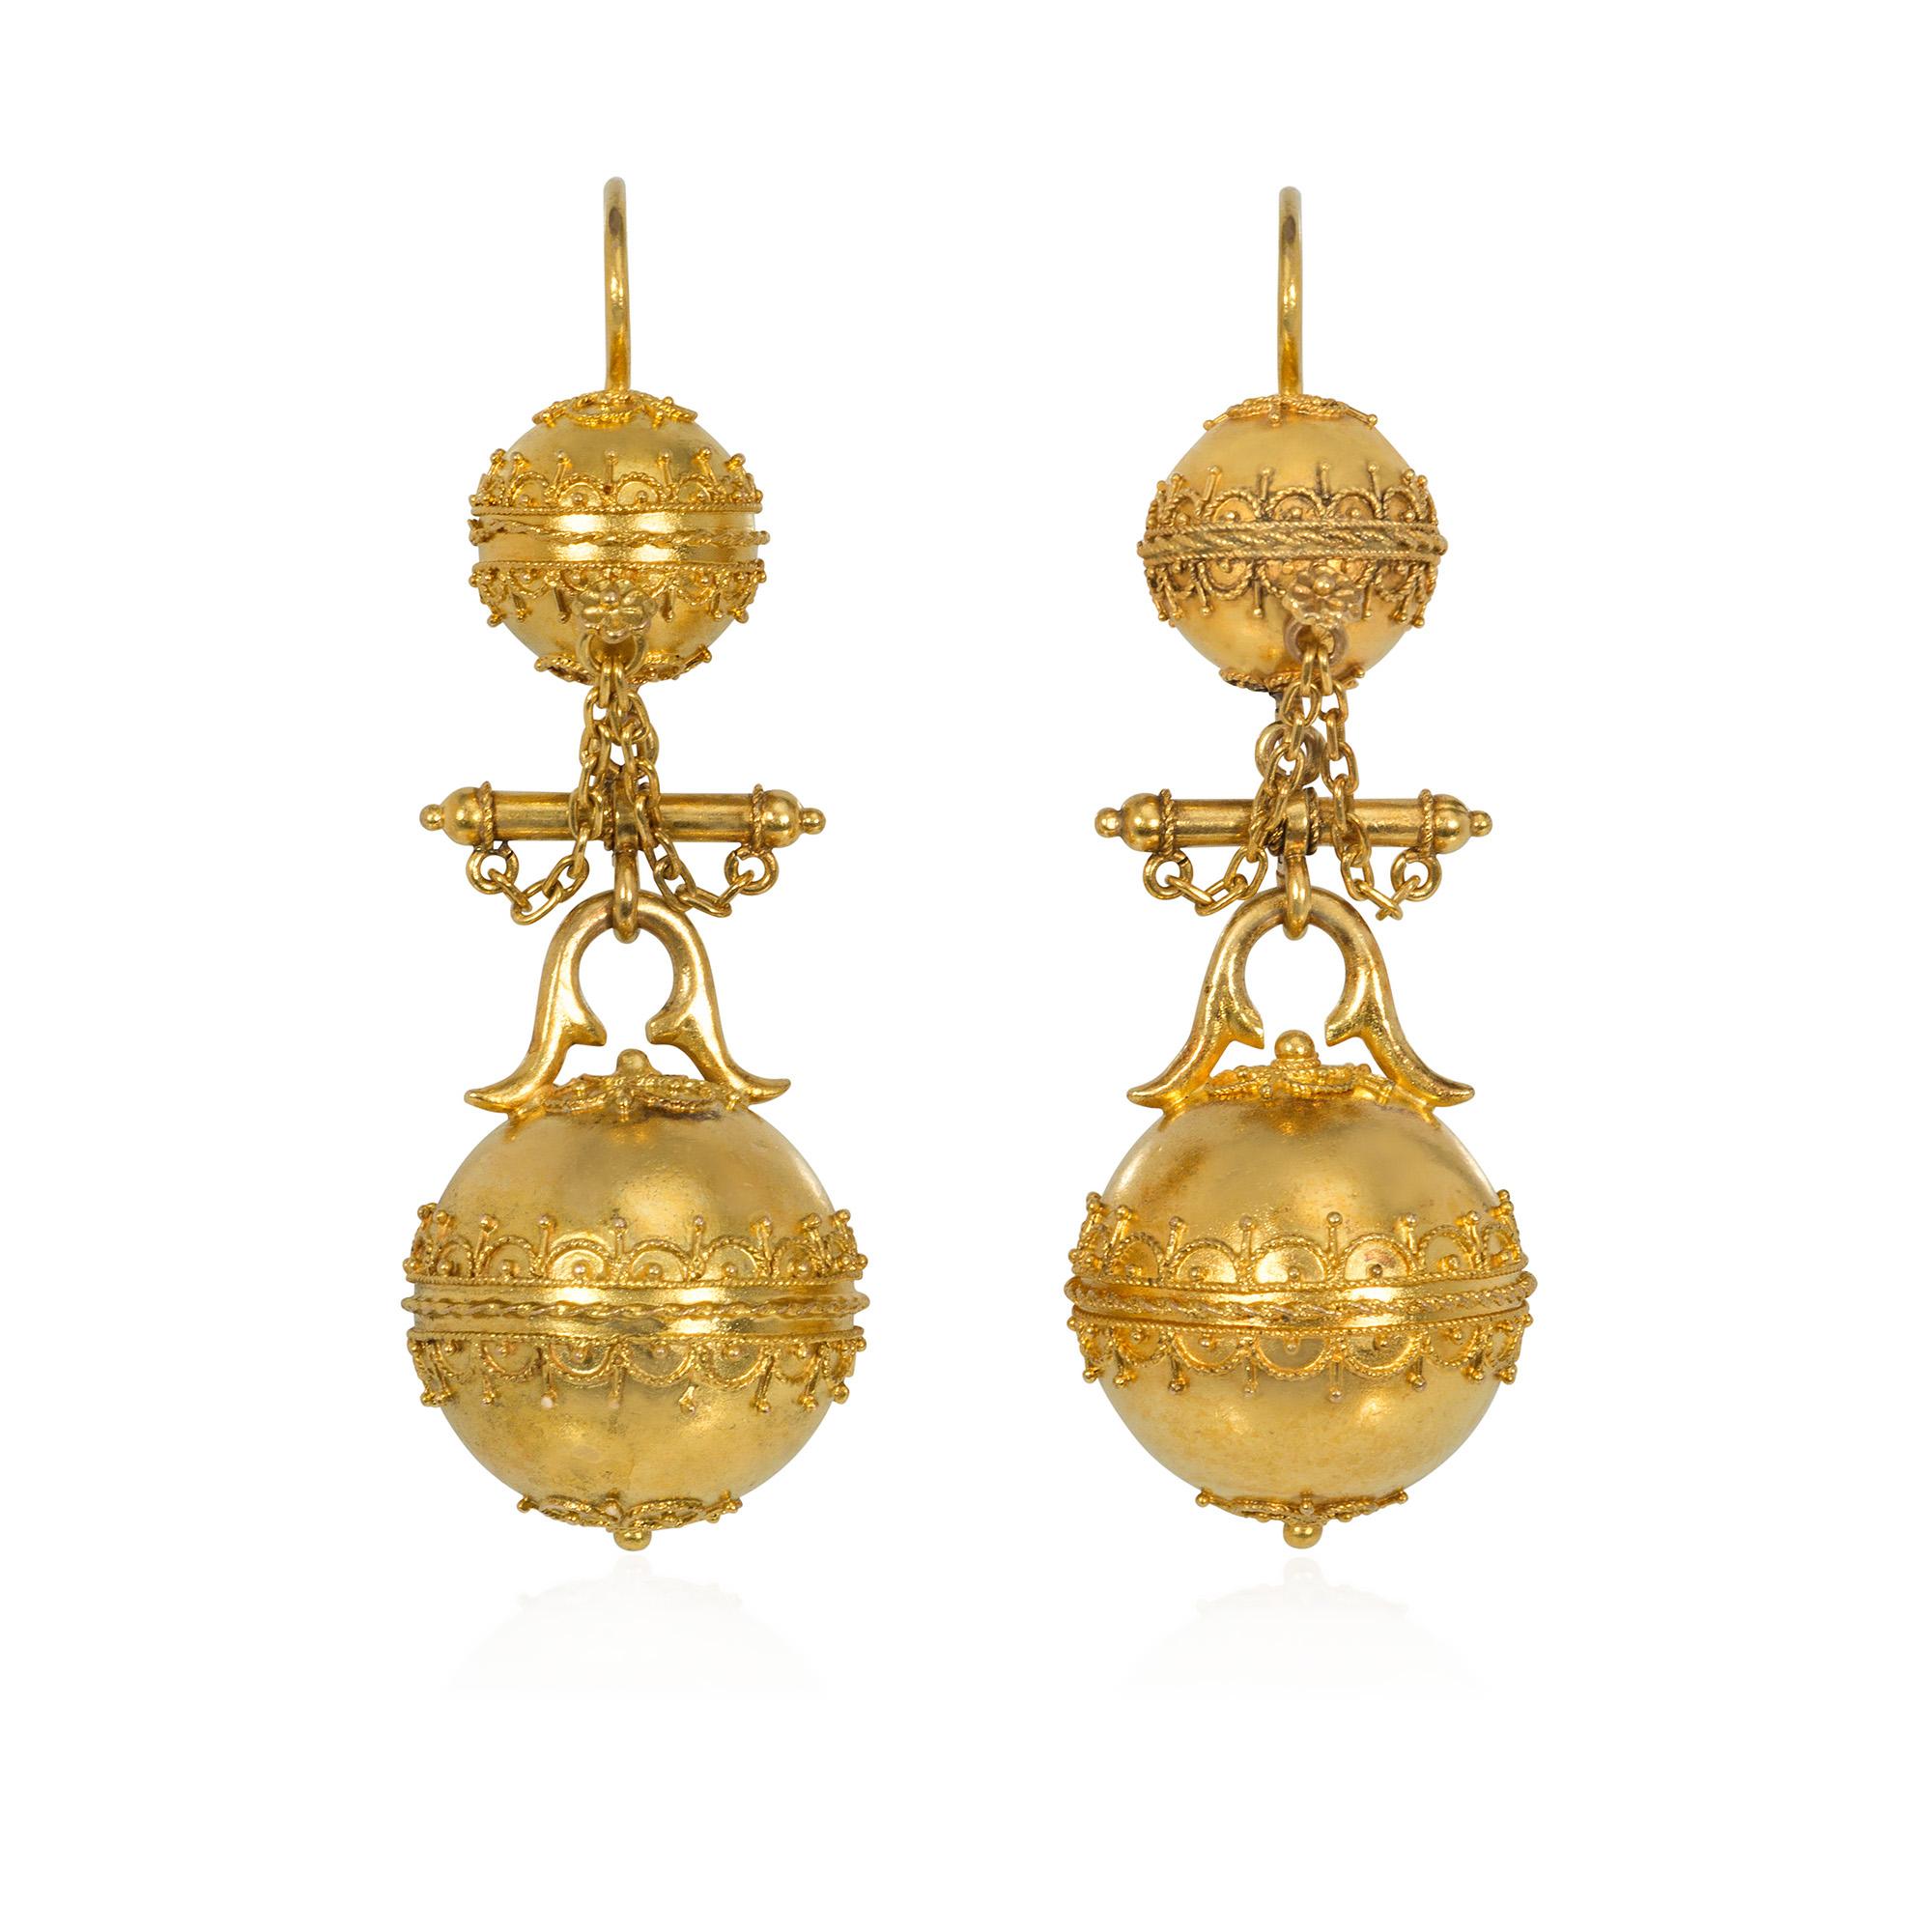 Antique Etruscan Revival Gold Bead and Wirework Pendant Earrings